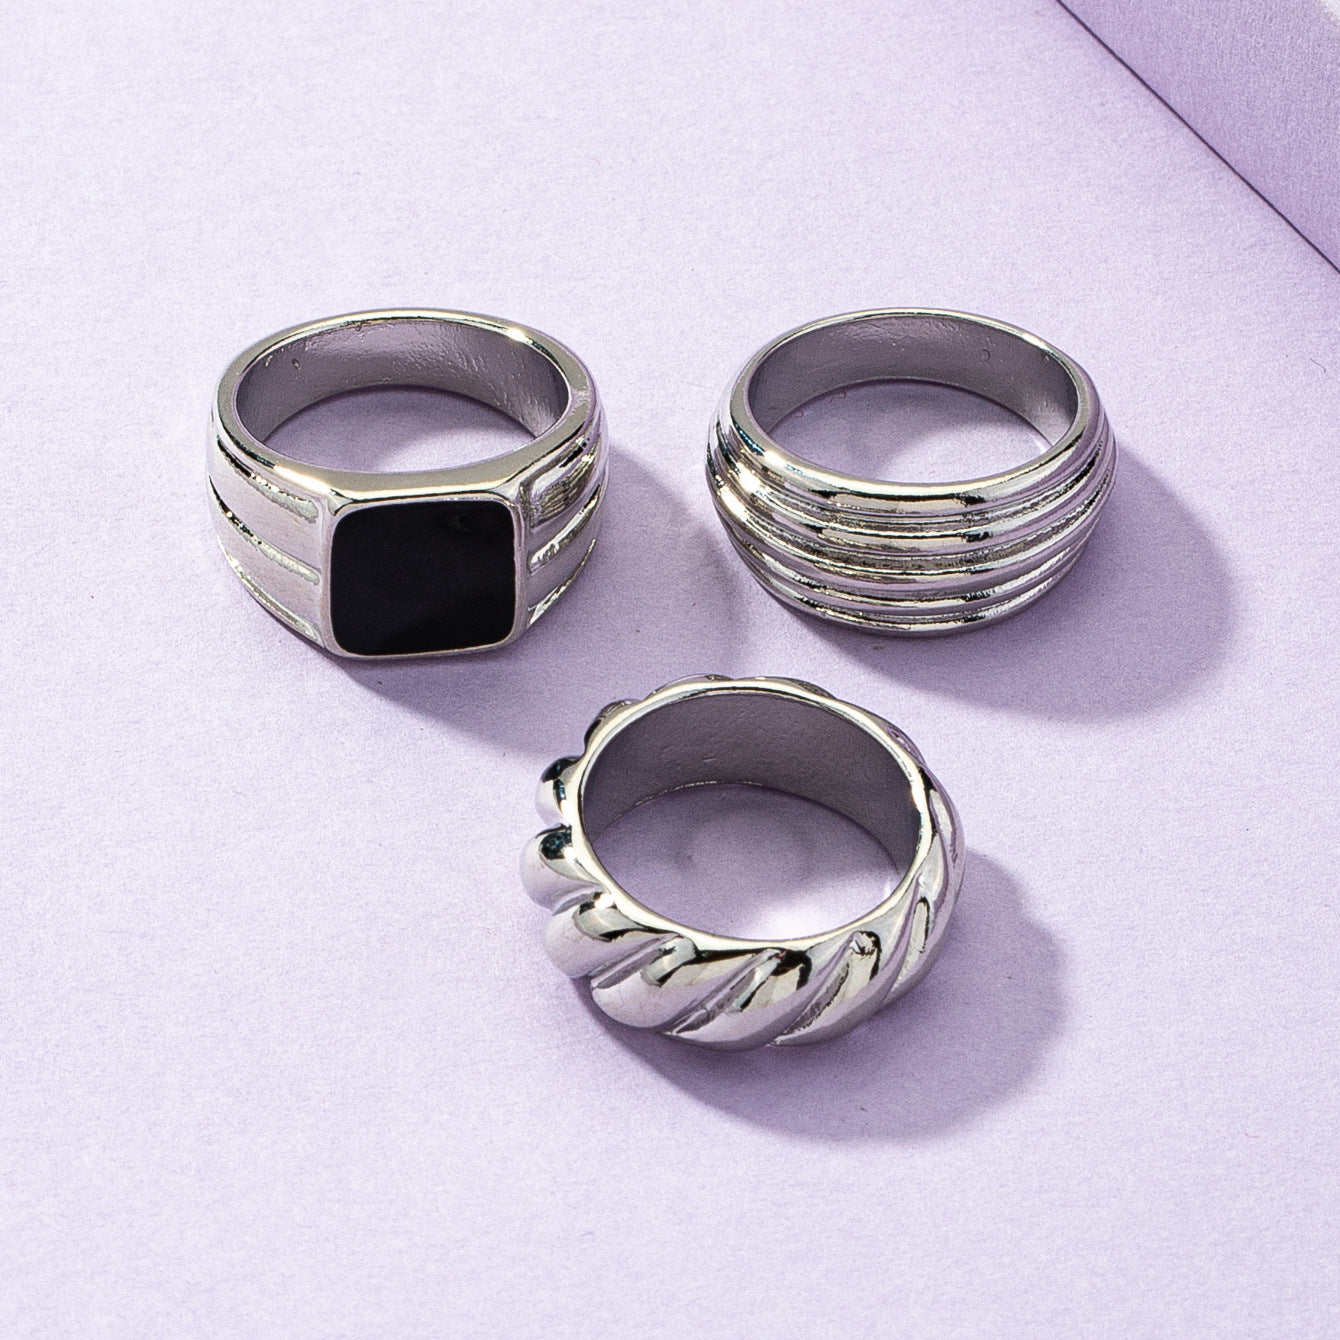 Exquisite Vienna Verve Metal Ring Set - Trio of Rings by Planderful